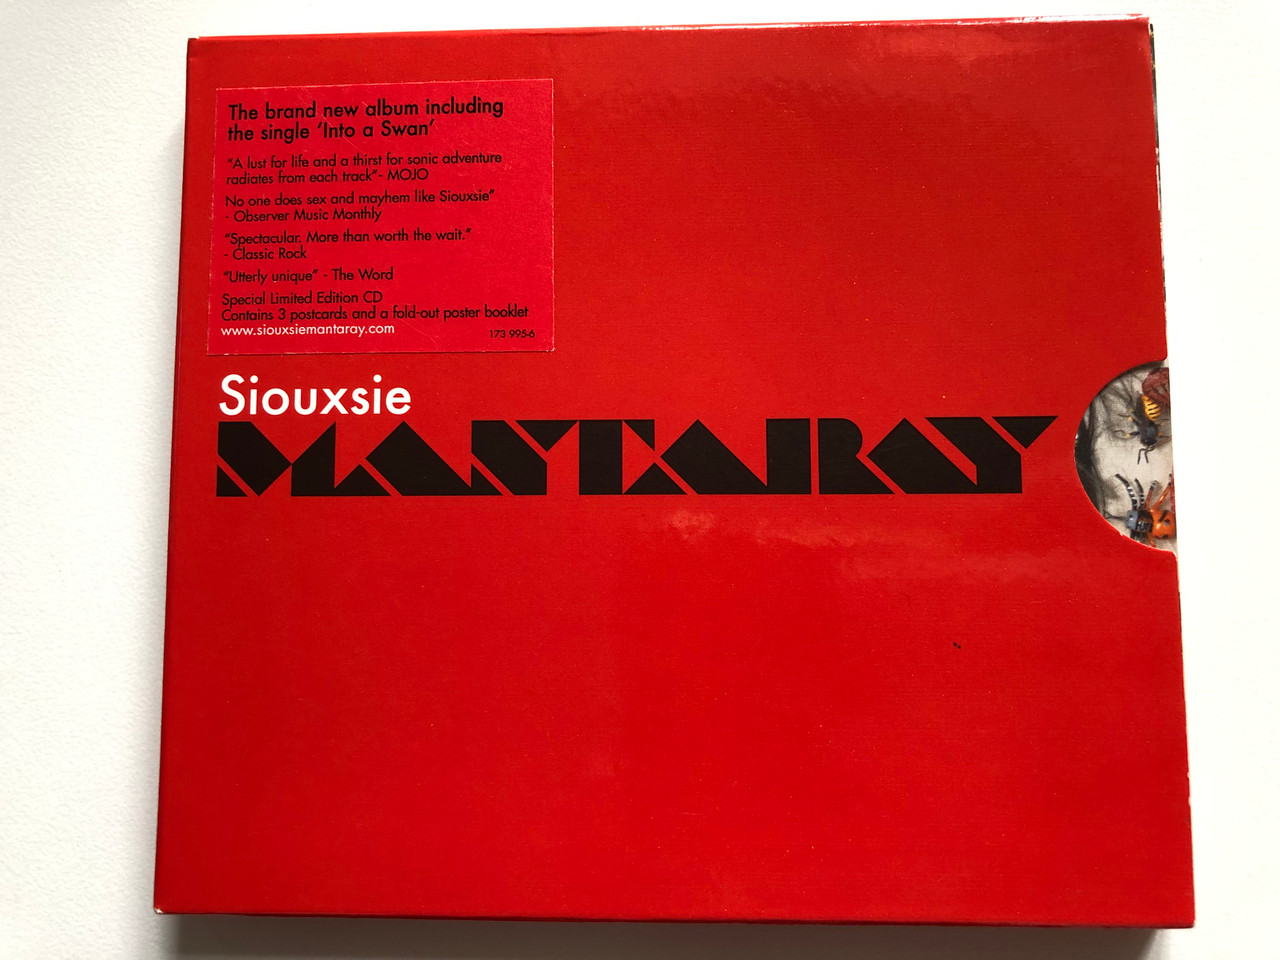 https://cdn10.bigcommerce.com/s-62bdpkt7pb/products/0/images/228000/Siouxsie_Mantaray_The_Brand_New_Album_including_the_single_Into_a_Swan_Special_Limited_Edition_CD_Contains_3_postcards_and_a_fold-out_poster_booklet_W14_Music_Audio_CD_2007_173_995-6_1__10209.1652862130.1280.1280.JPG?c=2&_gl=1*1e0fvn0*_ga*MjA2NTIxMjE2MC4xNTkwNTEyNTMy*_ga_WS2VZYPC6G*MTY1Mjg1NTcwMS40MDEuMS4xNjUyODYxOTU3LjQx